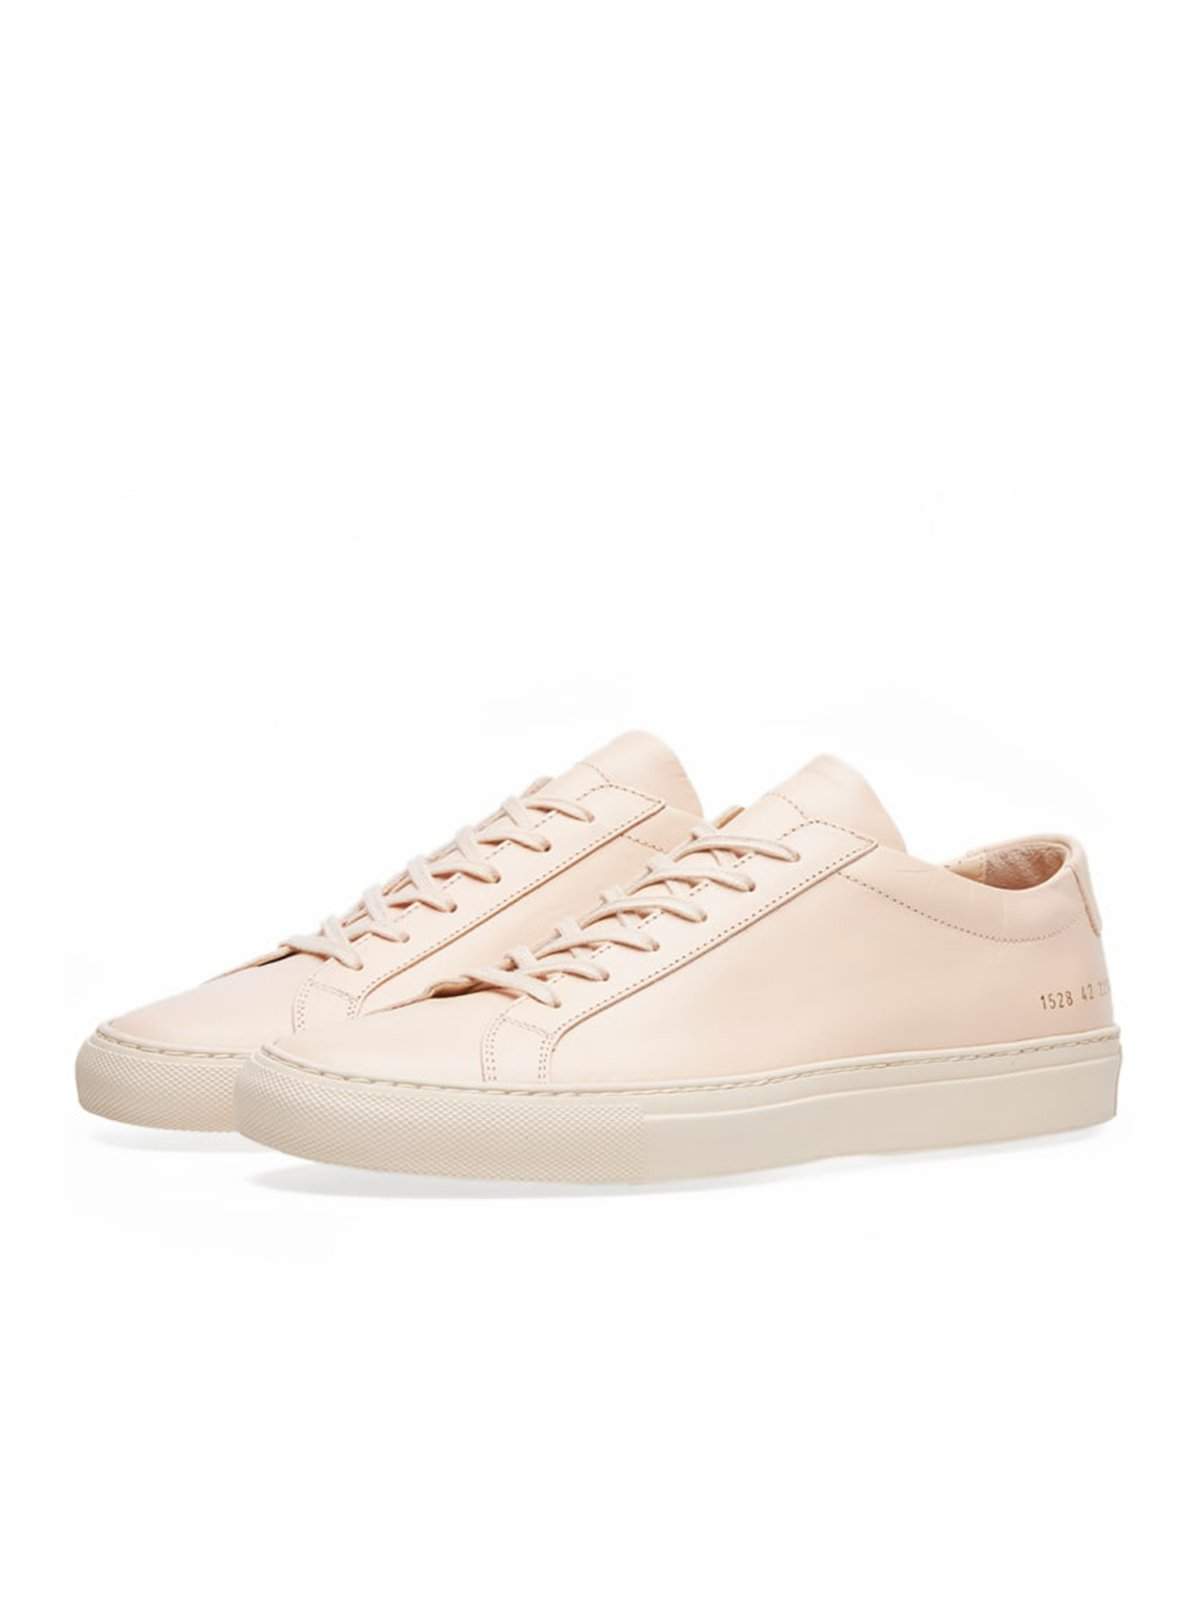 Common Projects Original Achilles Low Natural - MORE by Morello Indonesia